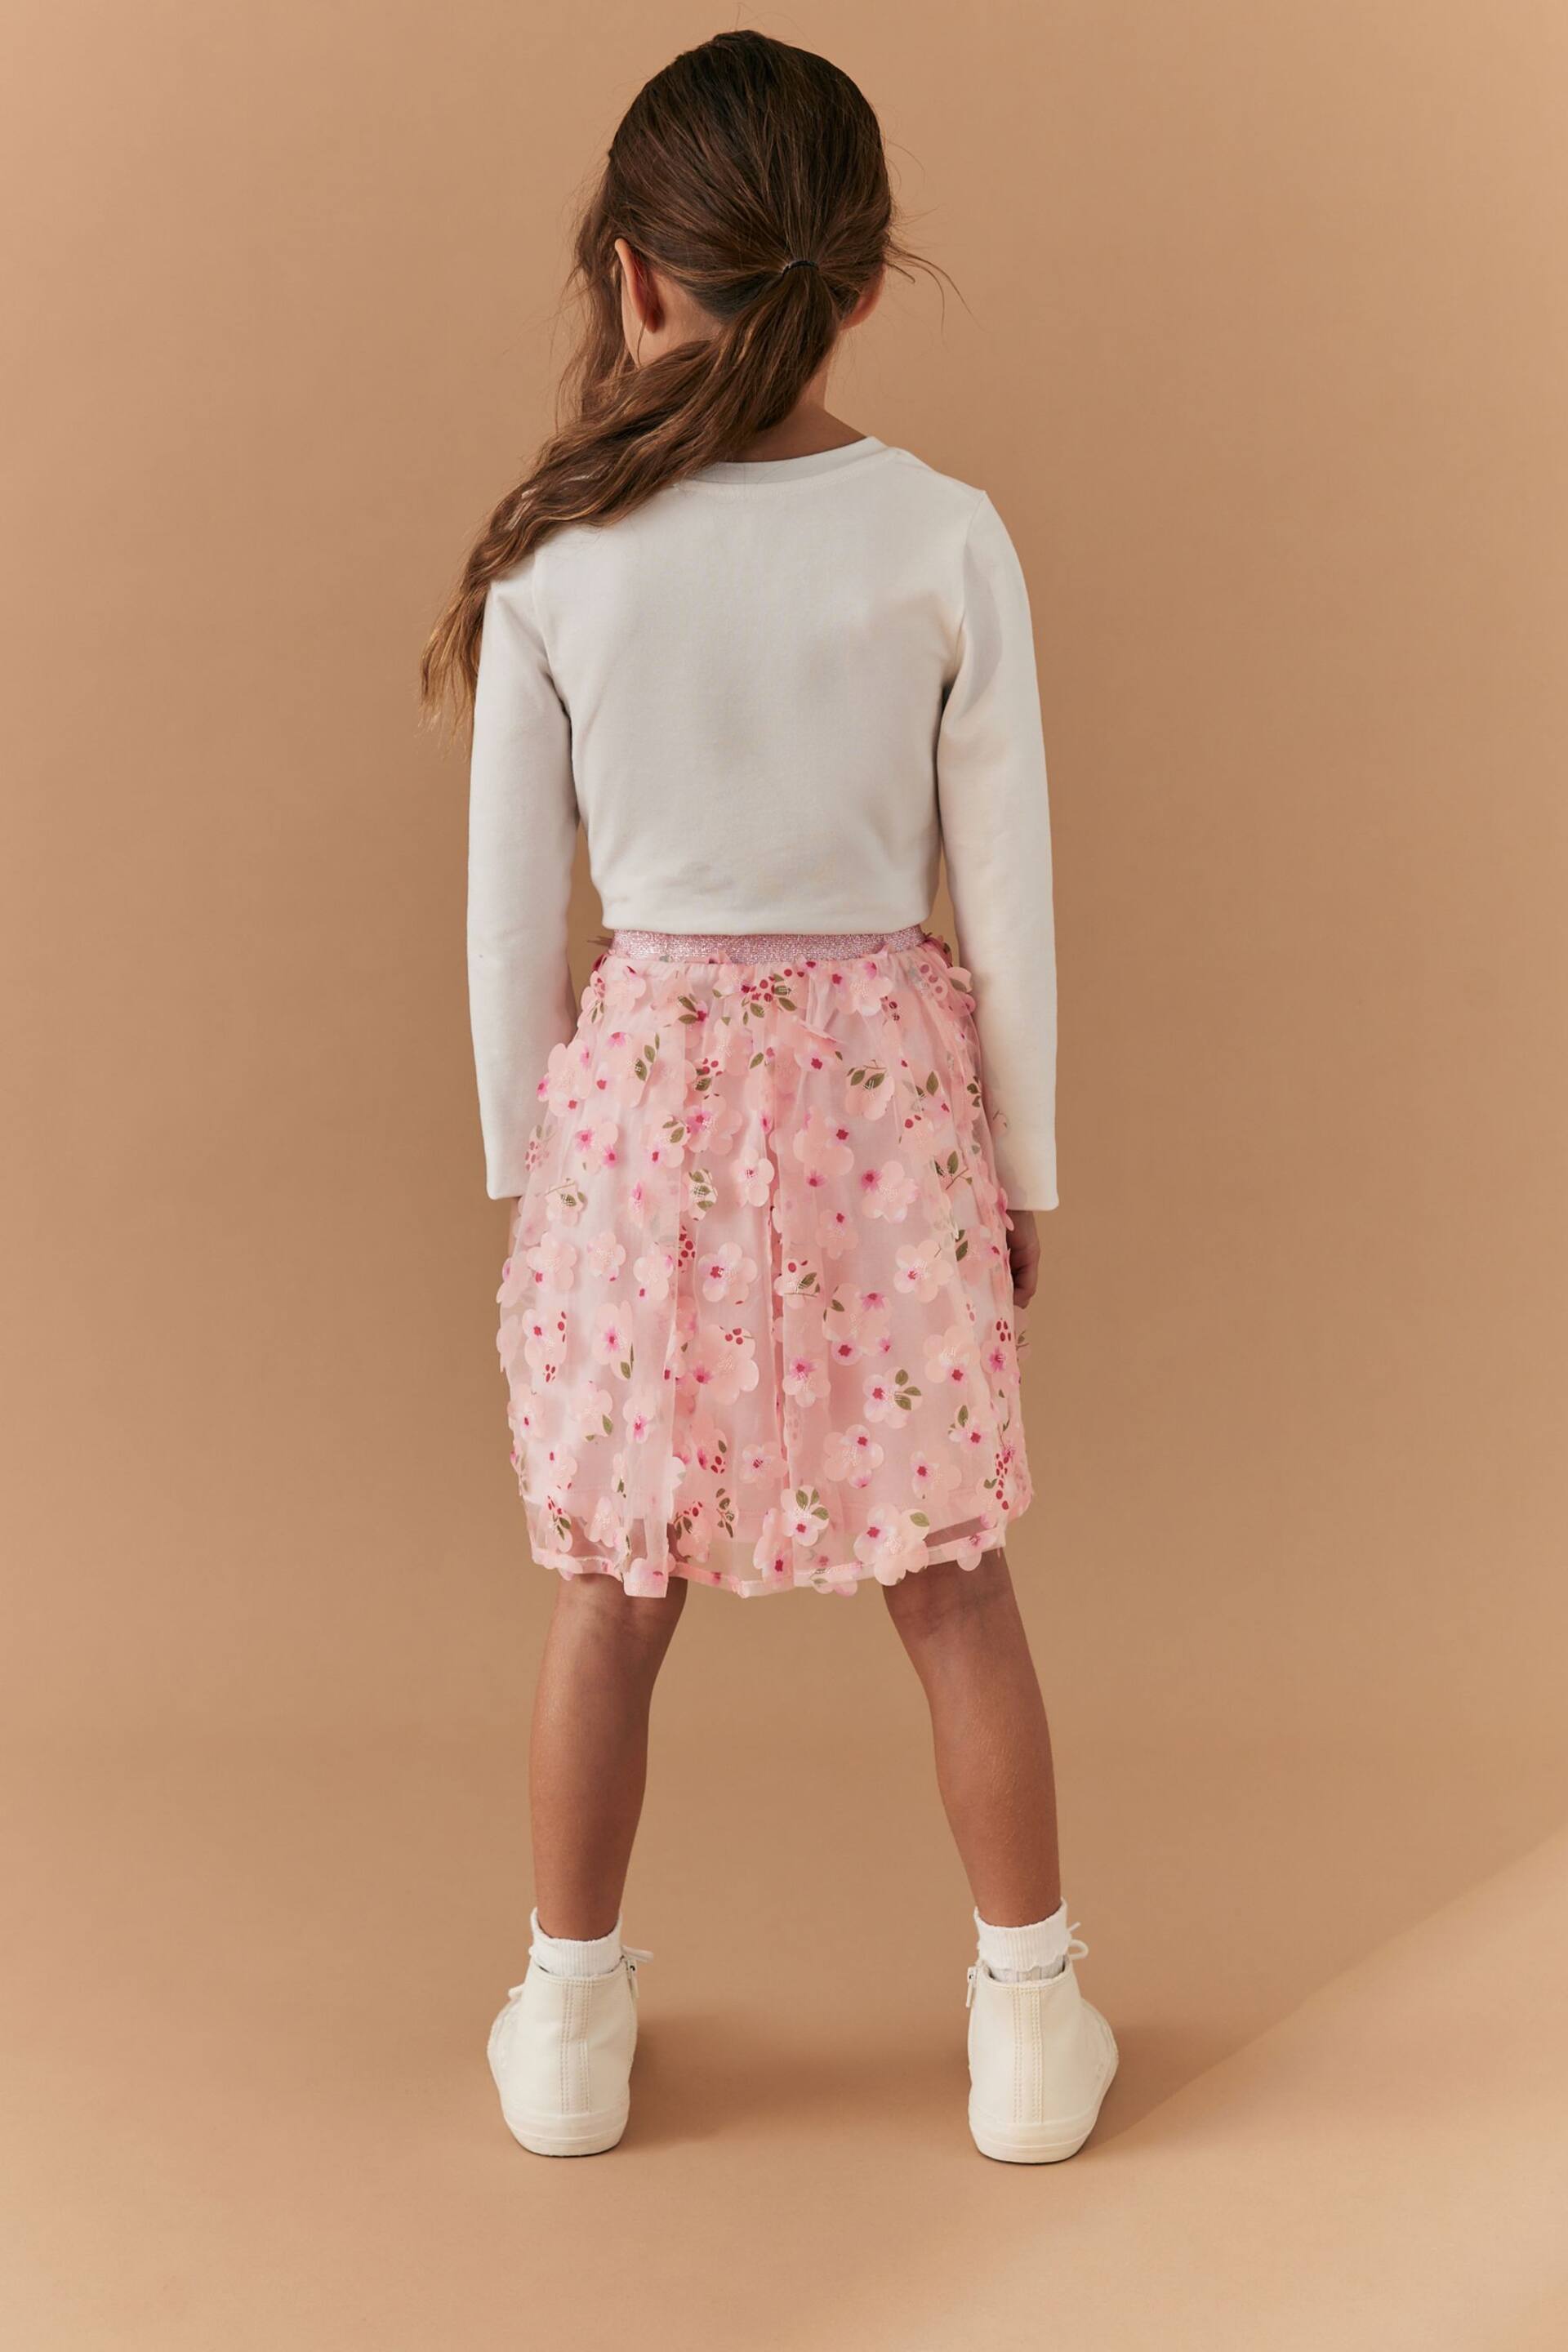 Blush Pink 3D Floral Pull-On Skirt (3-16yrs) - Image 4 of 7